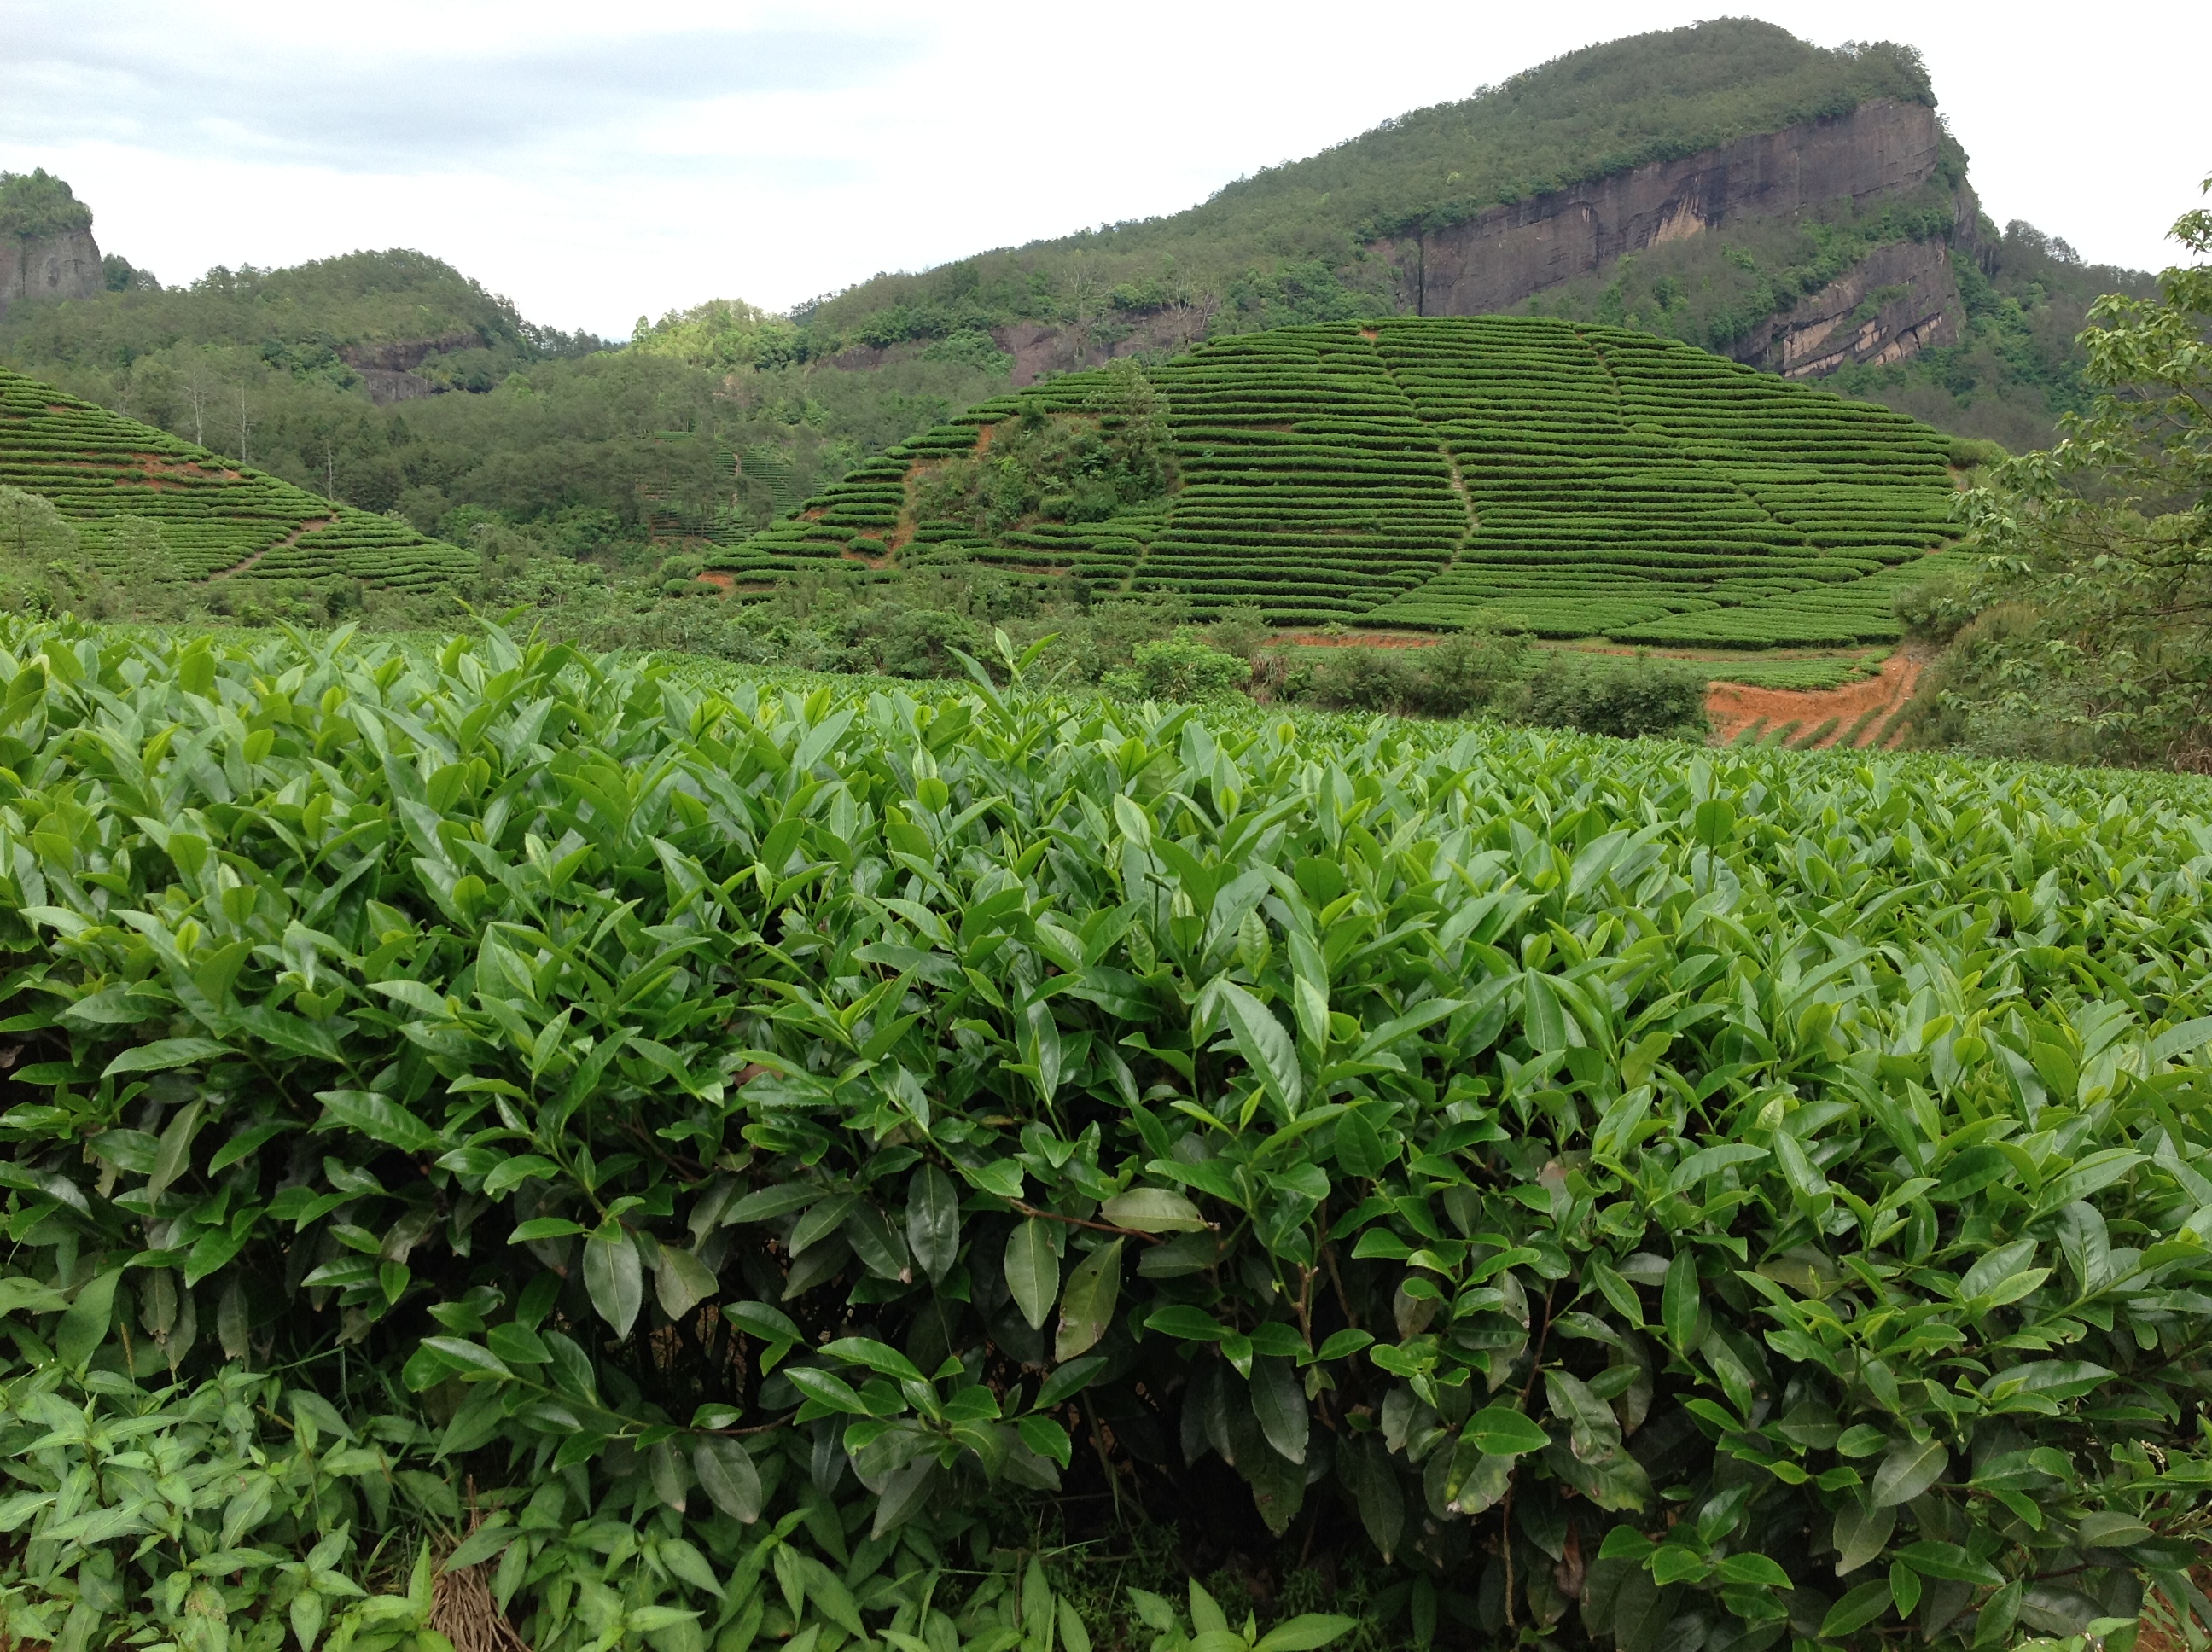 A bank of lush Shuixian tea bushes, with green hills covered in rows of more bushes in the background.